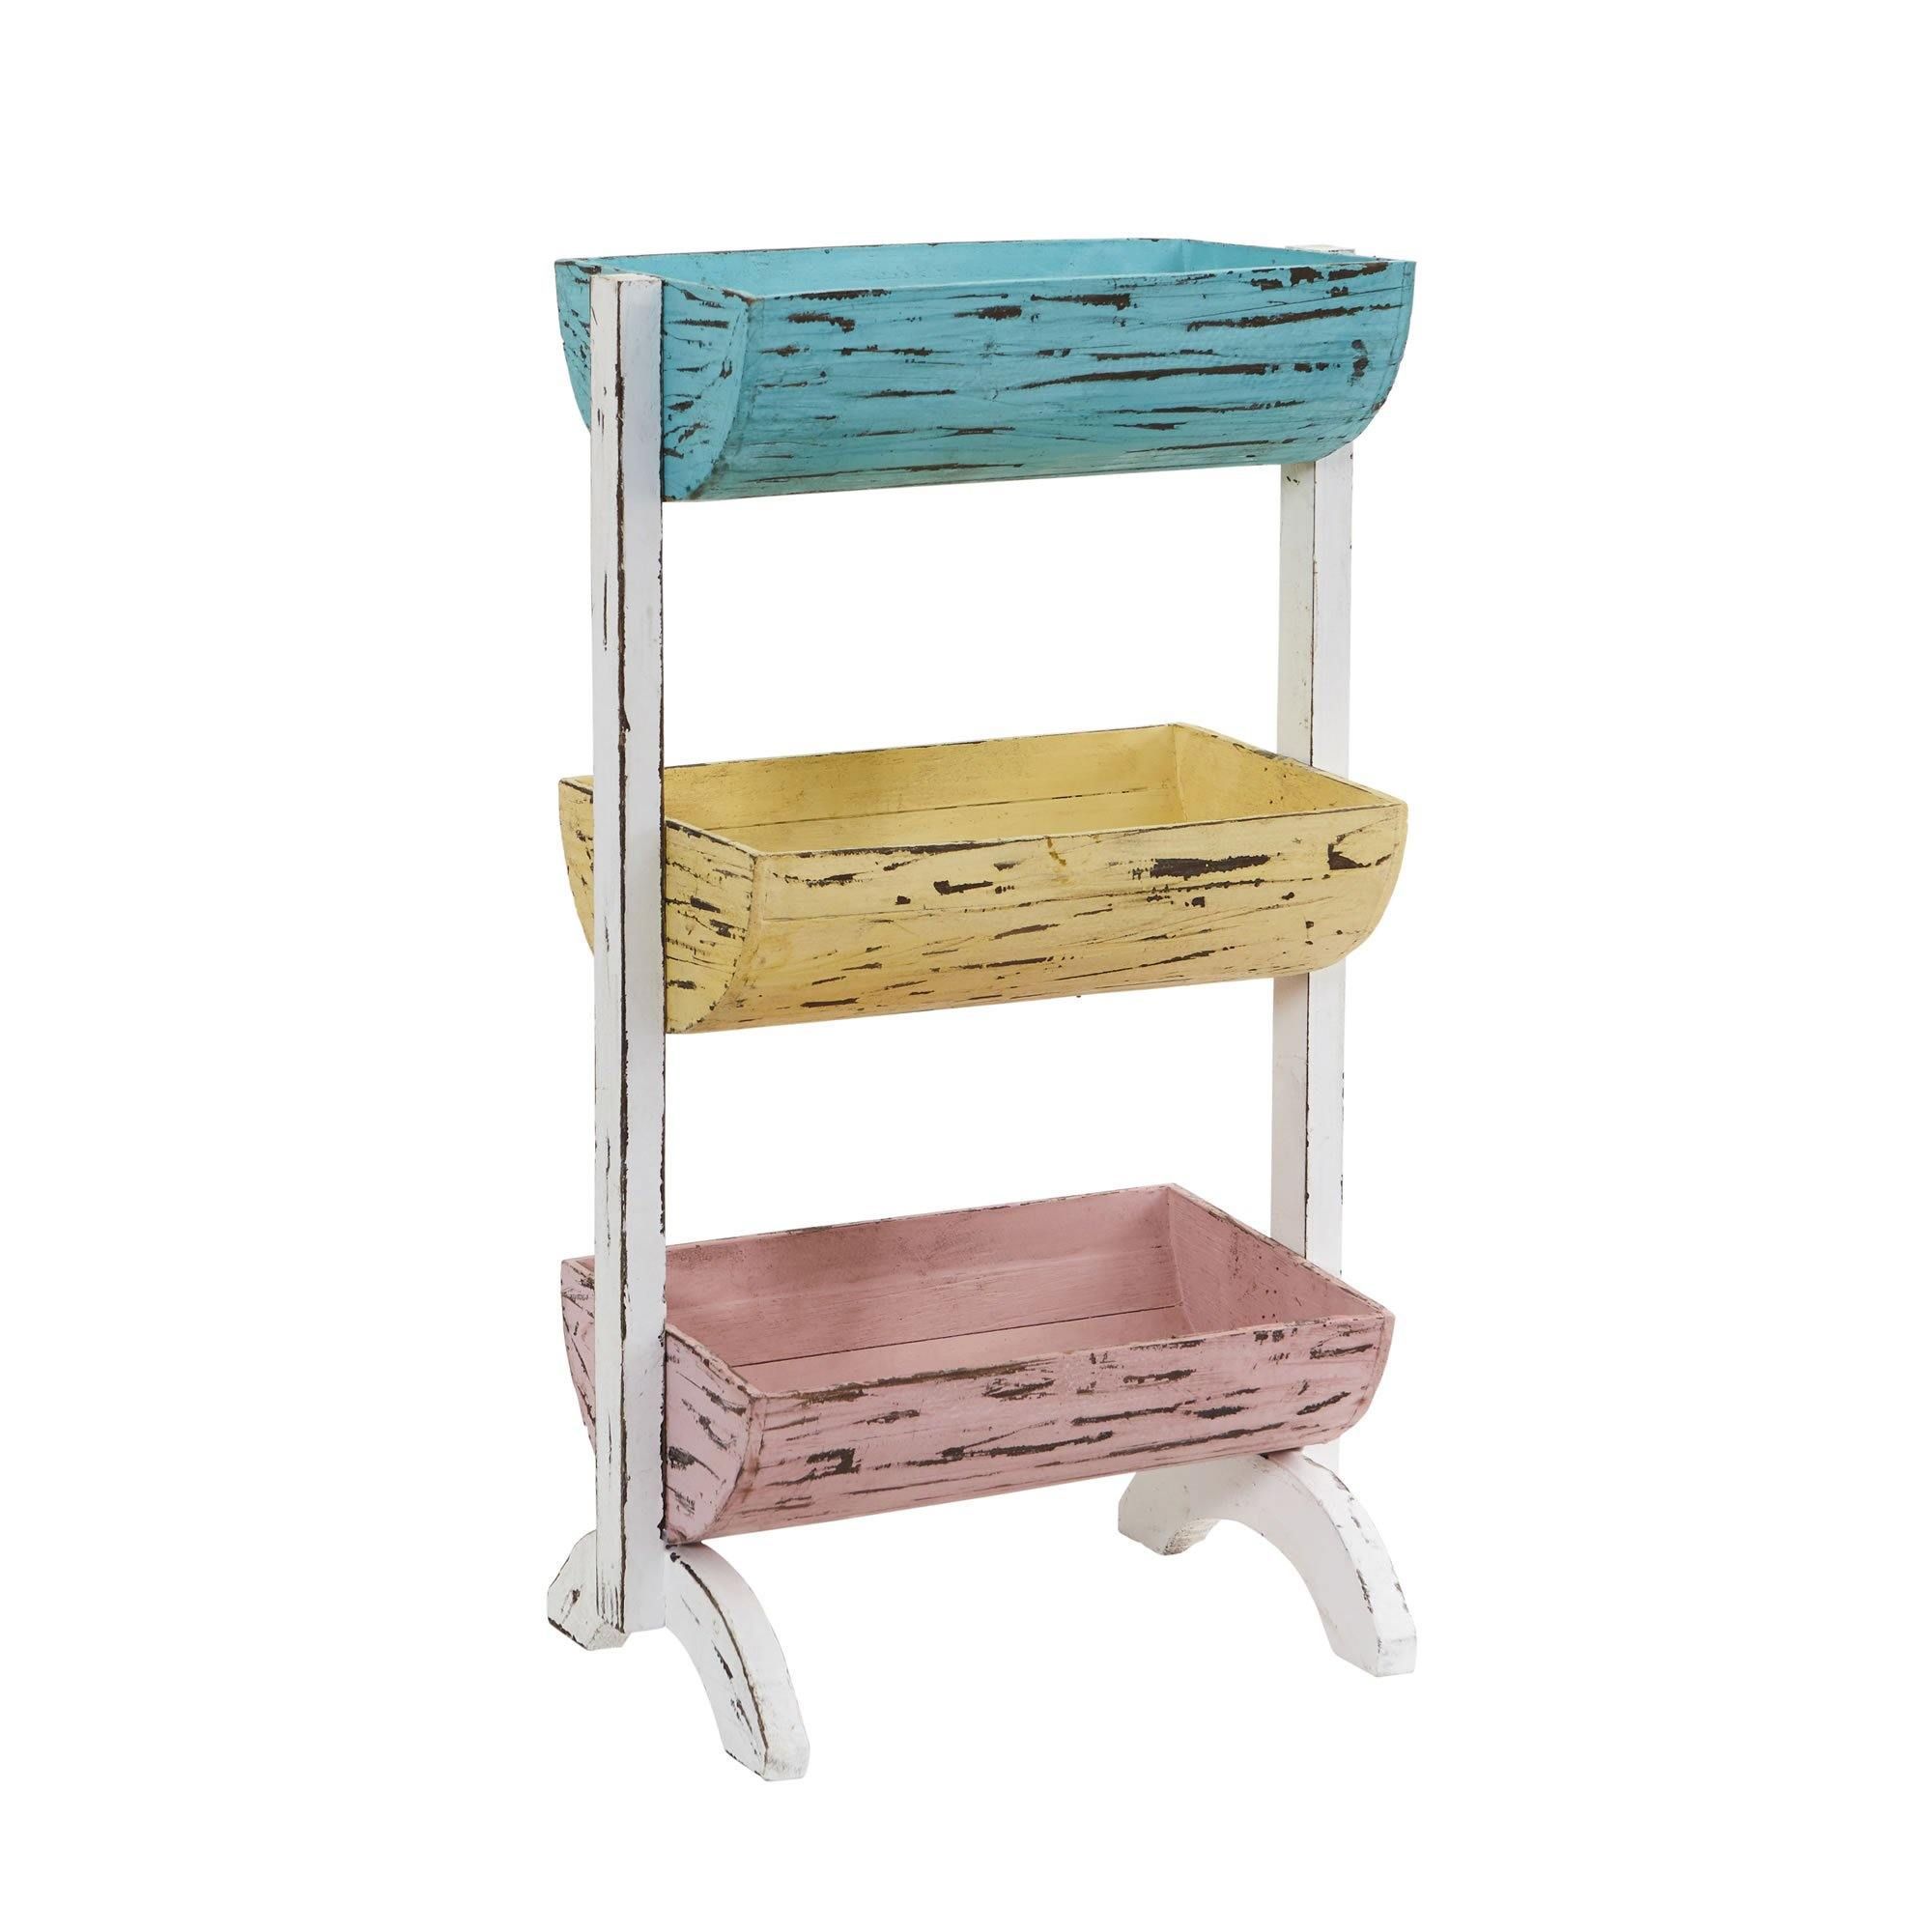 At 23 Inches In Height, This Multipurpose Farmhouse Stand, Planter Or Within Farmhouse Stands With Shelves (View 6 of 20)